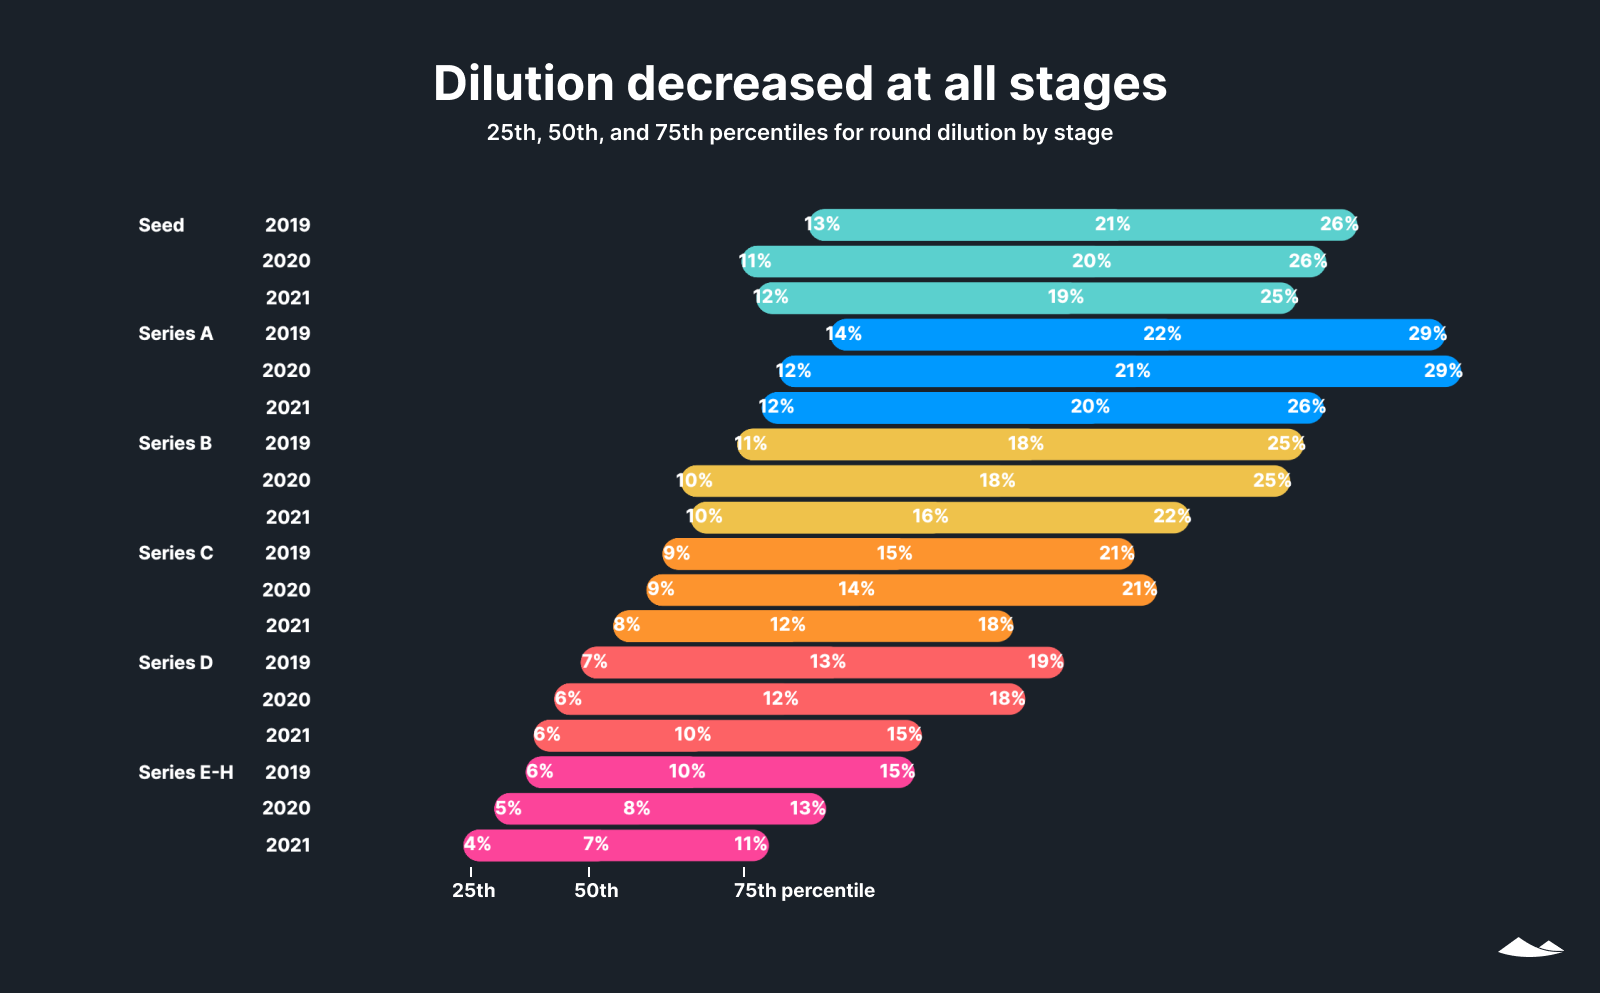 Dilution decreased at all stages, 2019-21: 25th, 50th, and 75th percentiles for round dilution by stage